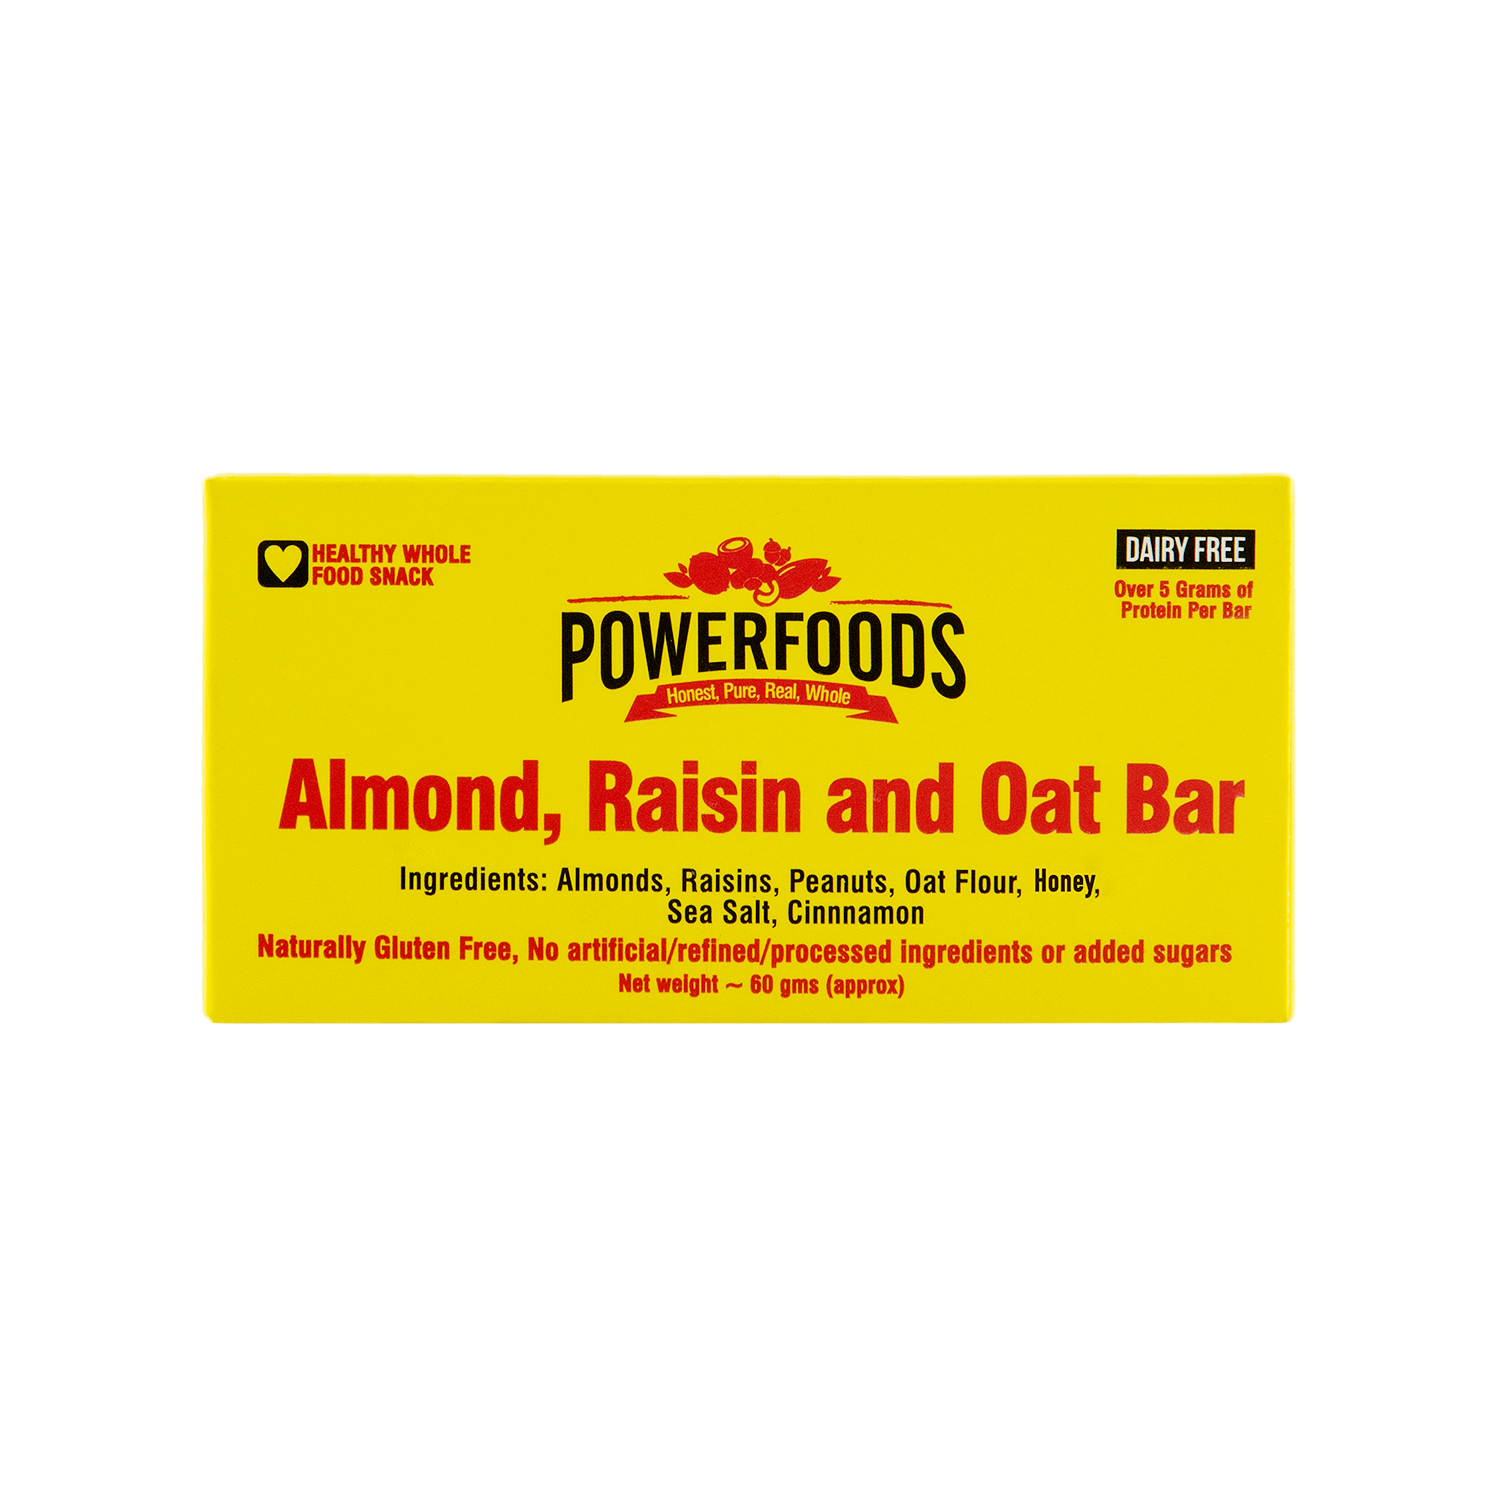 Almond, Raisin and Oat Bar (50 Grams Approx)